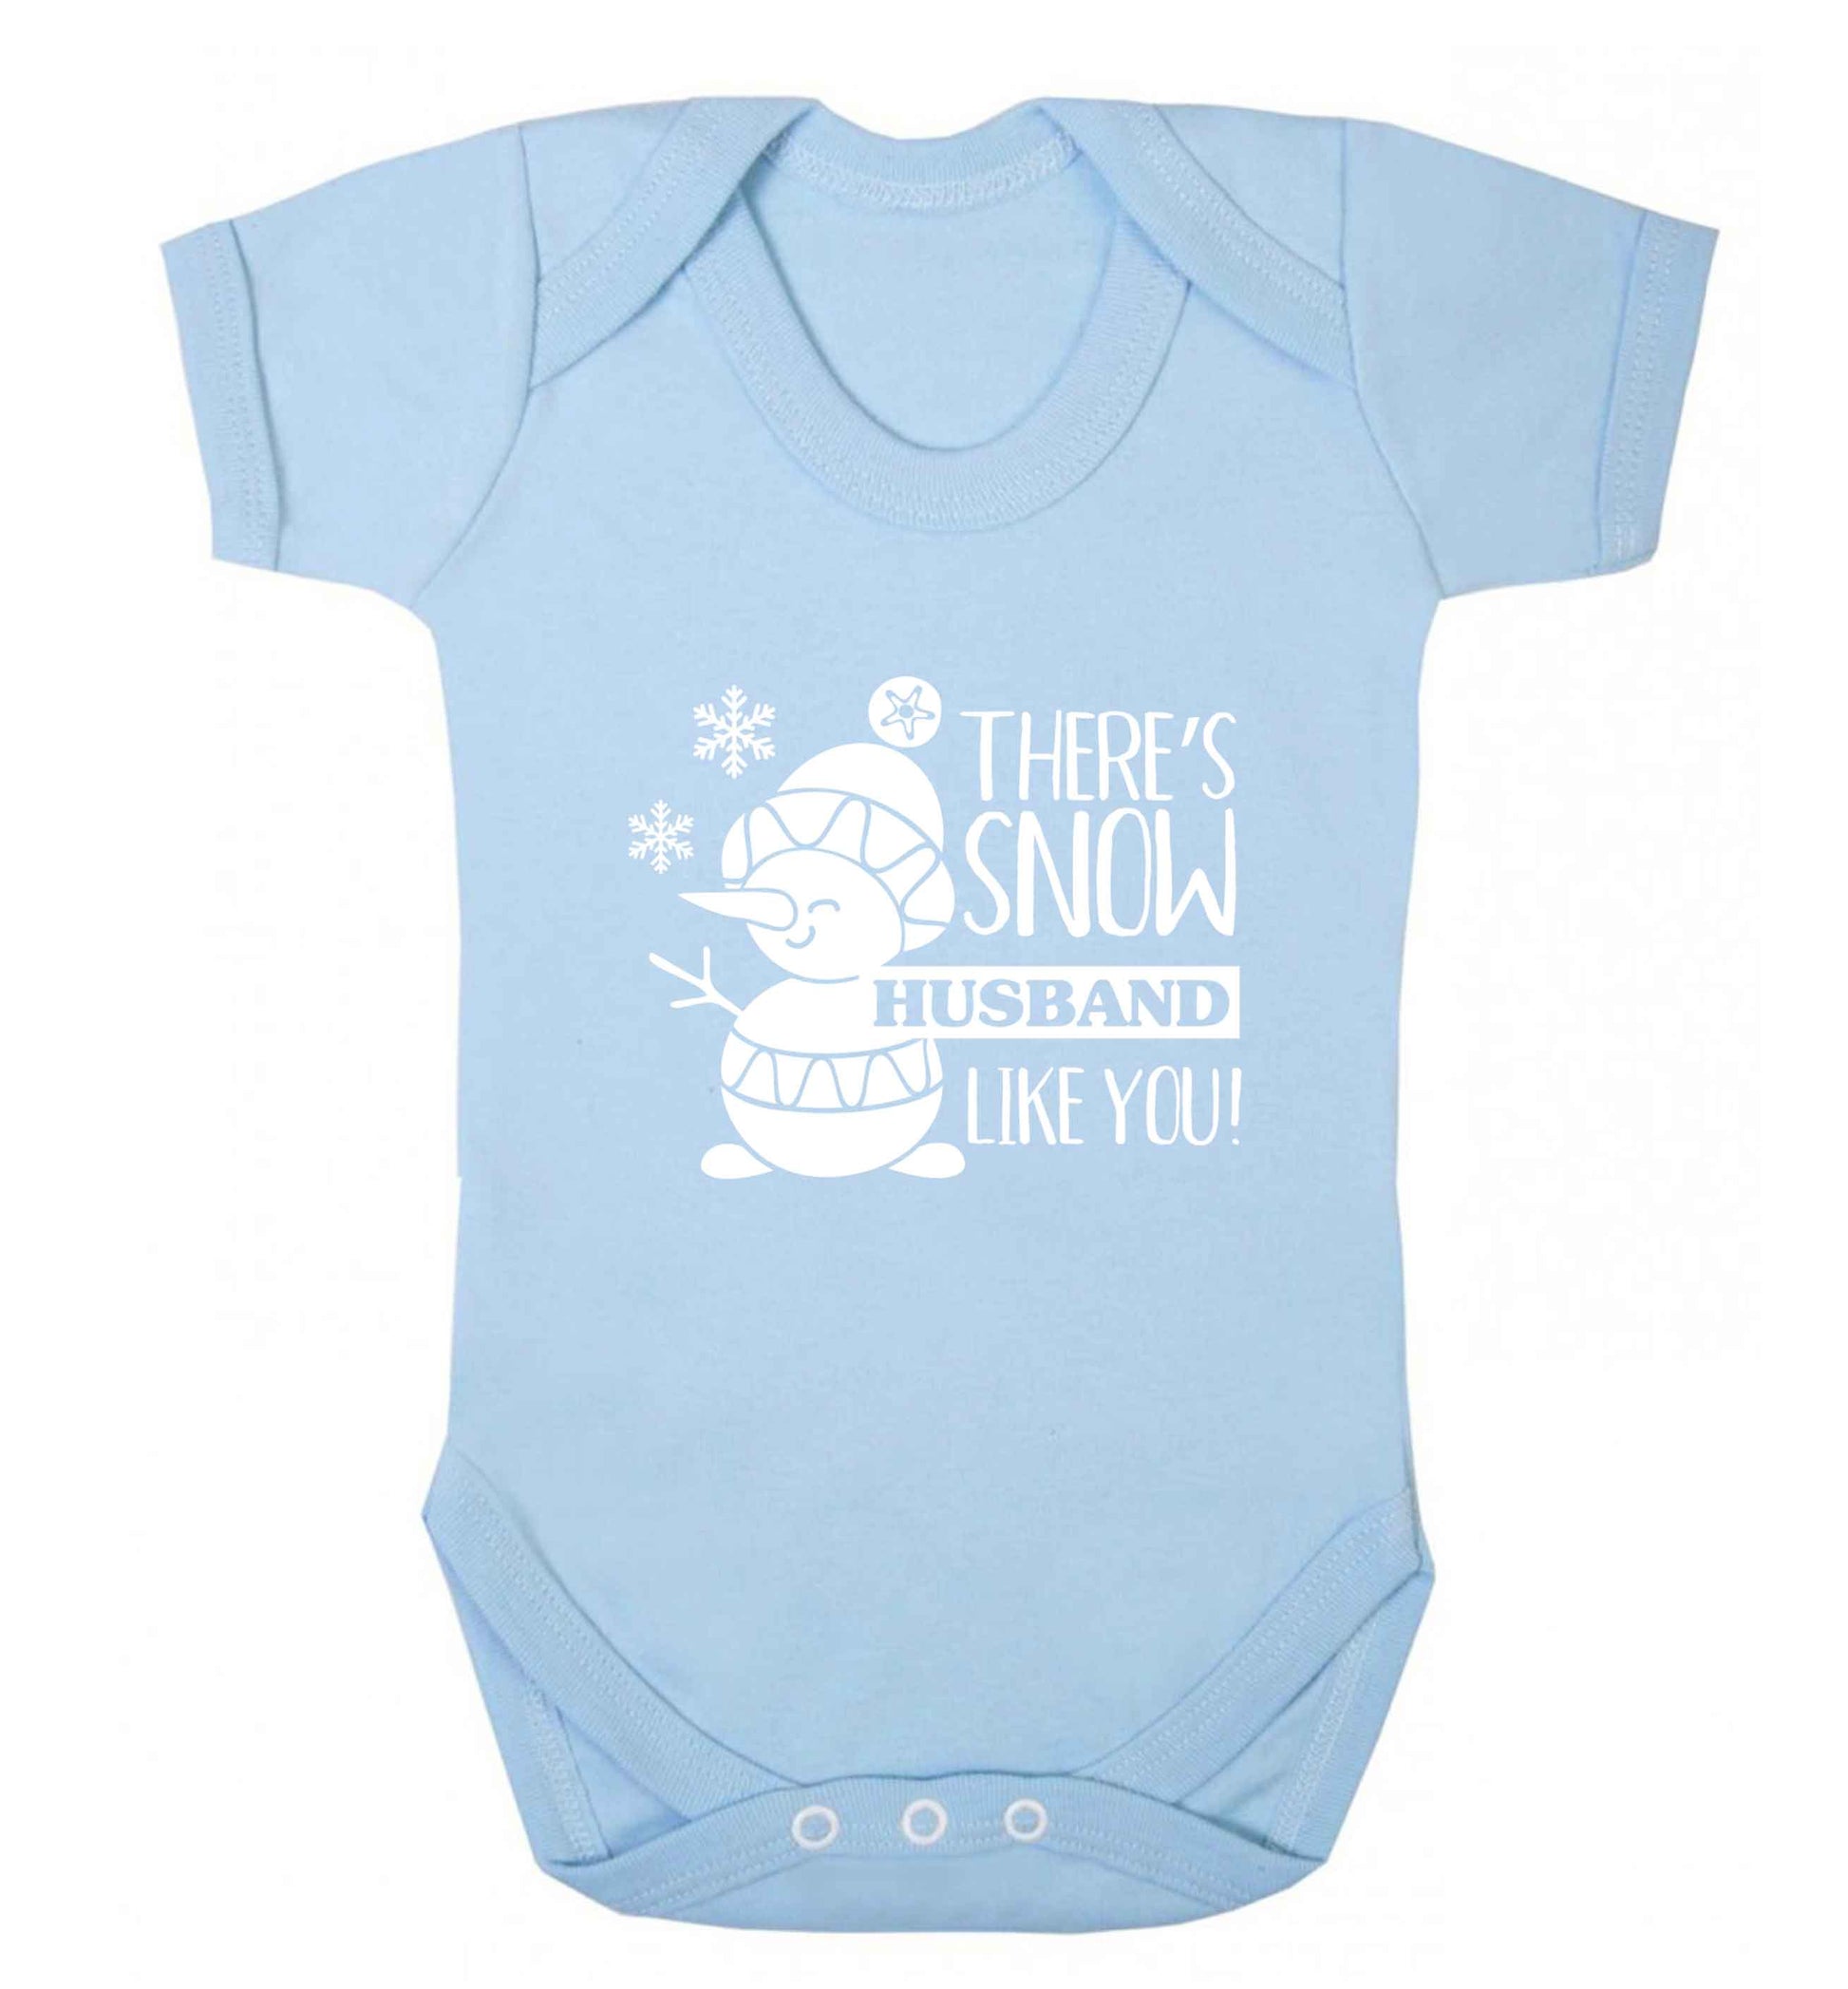 There's snow husband like you baby vest pale blue 18-24 months